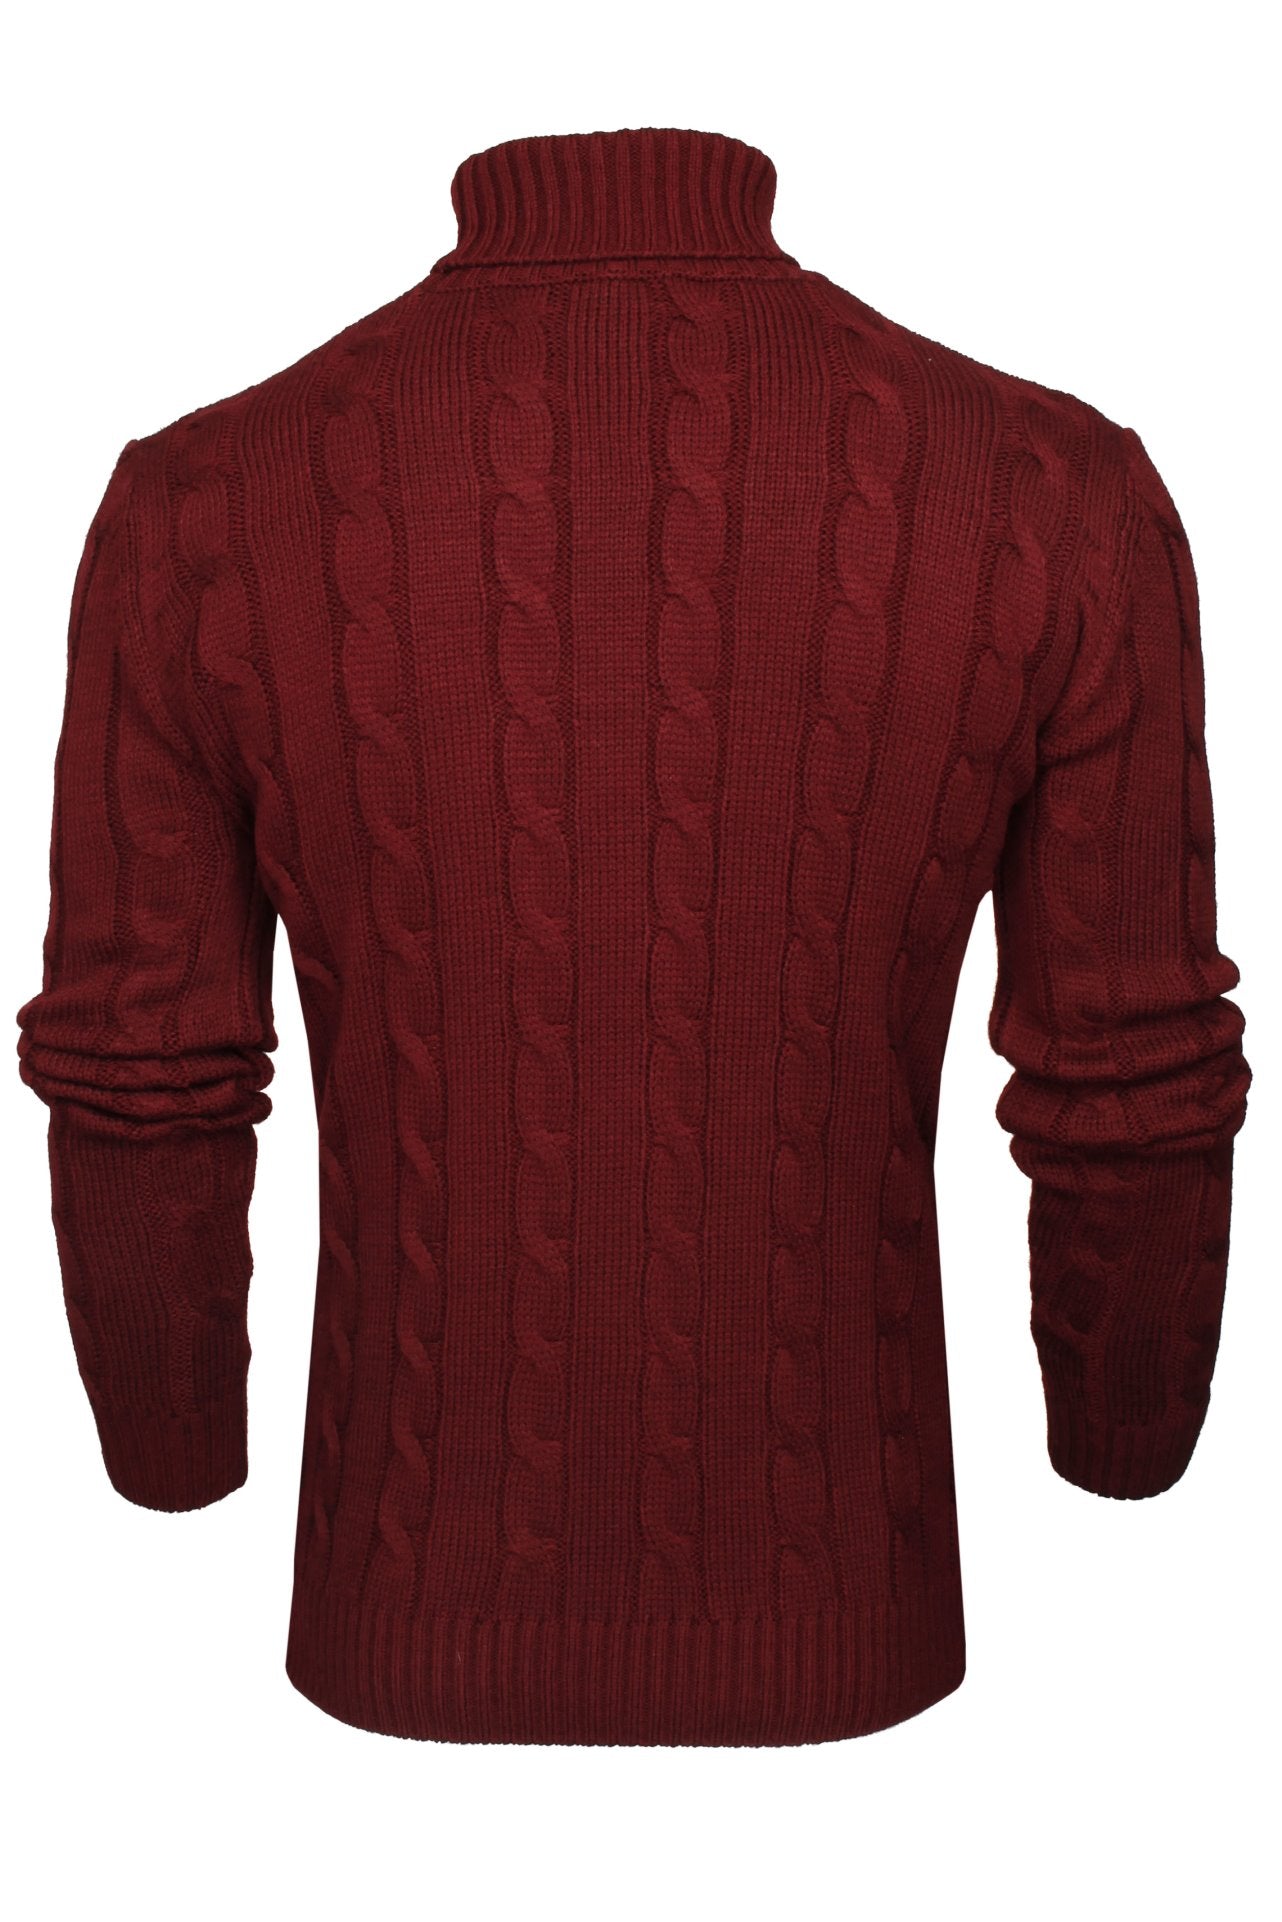 Xact Men's Roll Neck Cable Knit Jumper-3